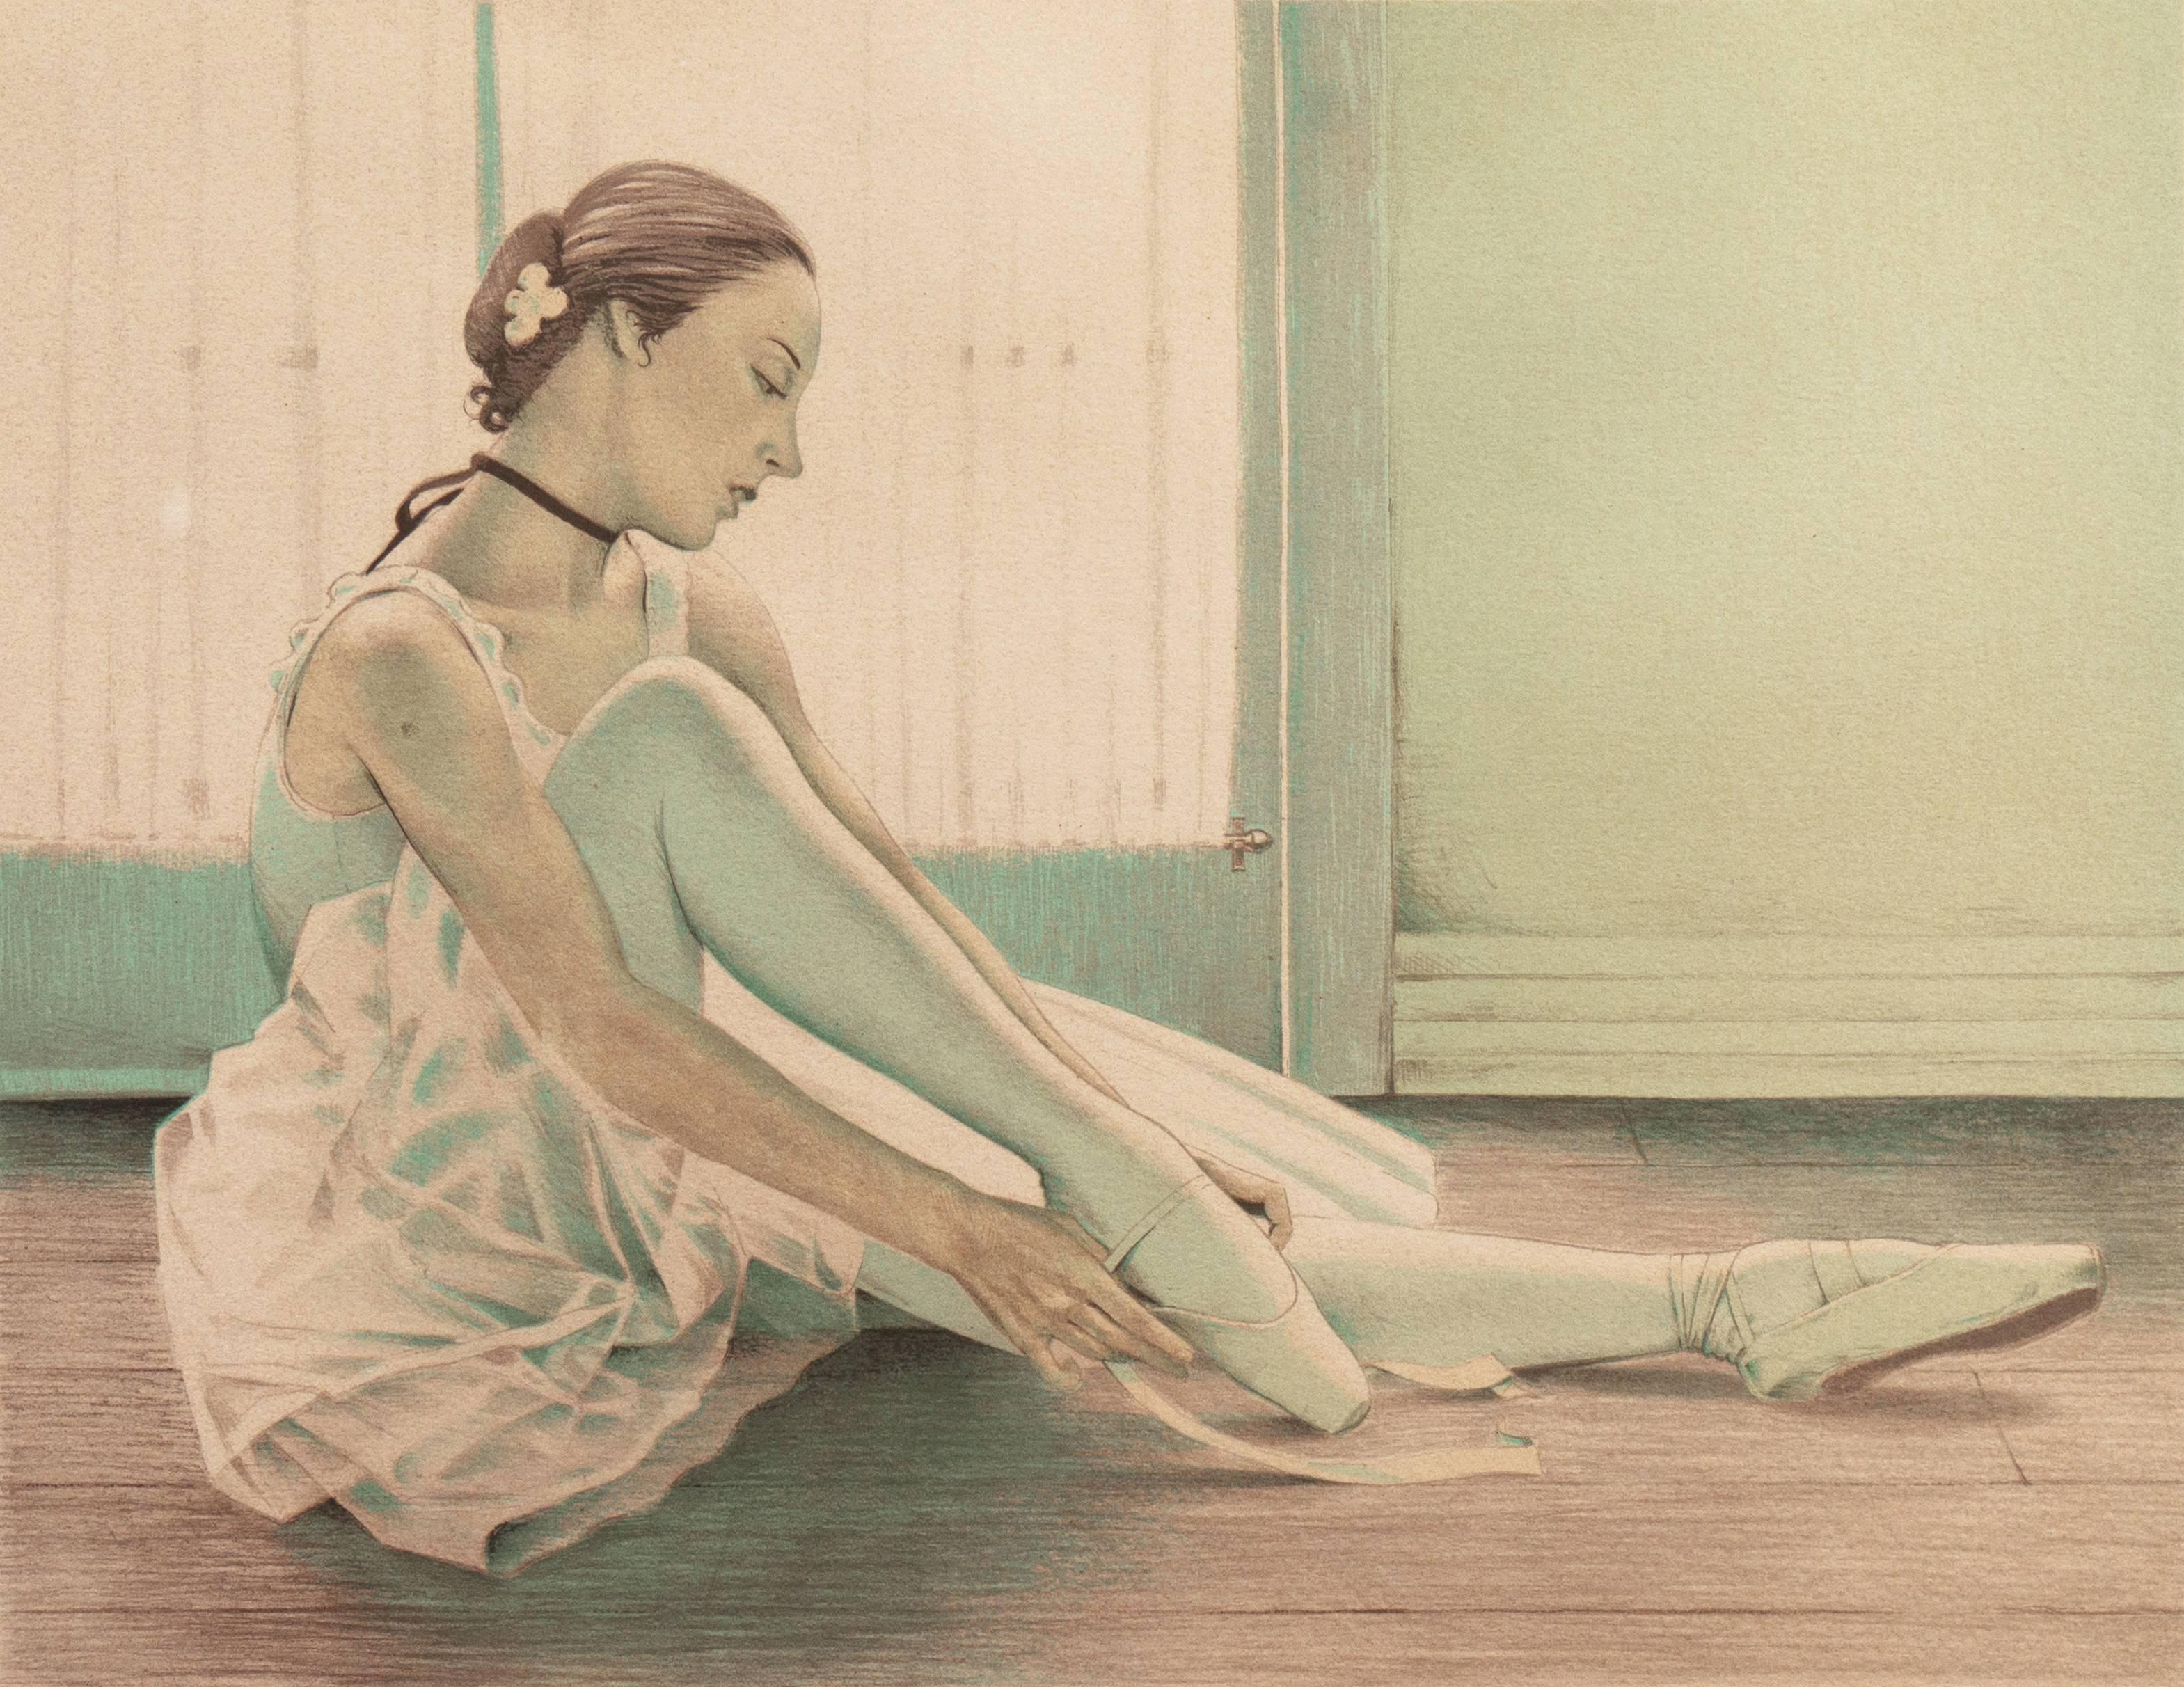 'Young Ballerina', American Impressionist, National Academy of Design, New York